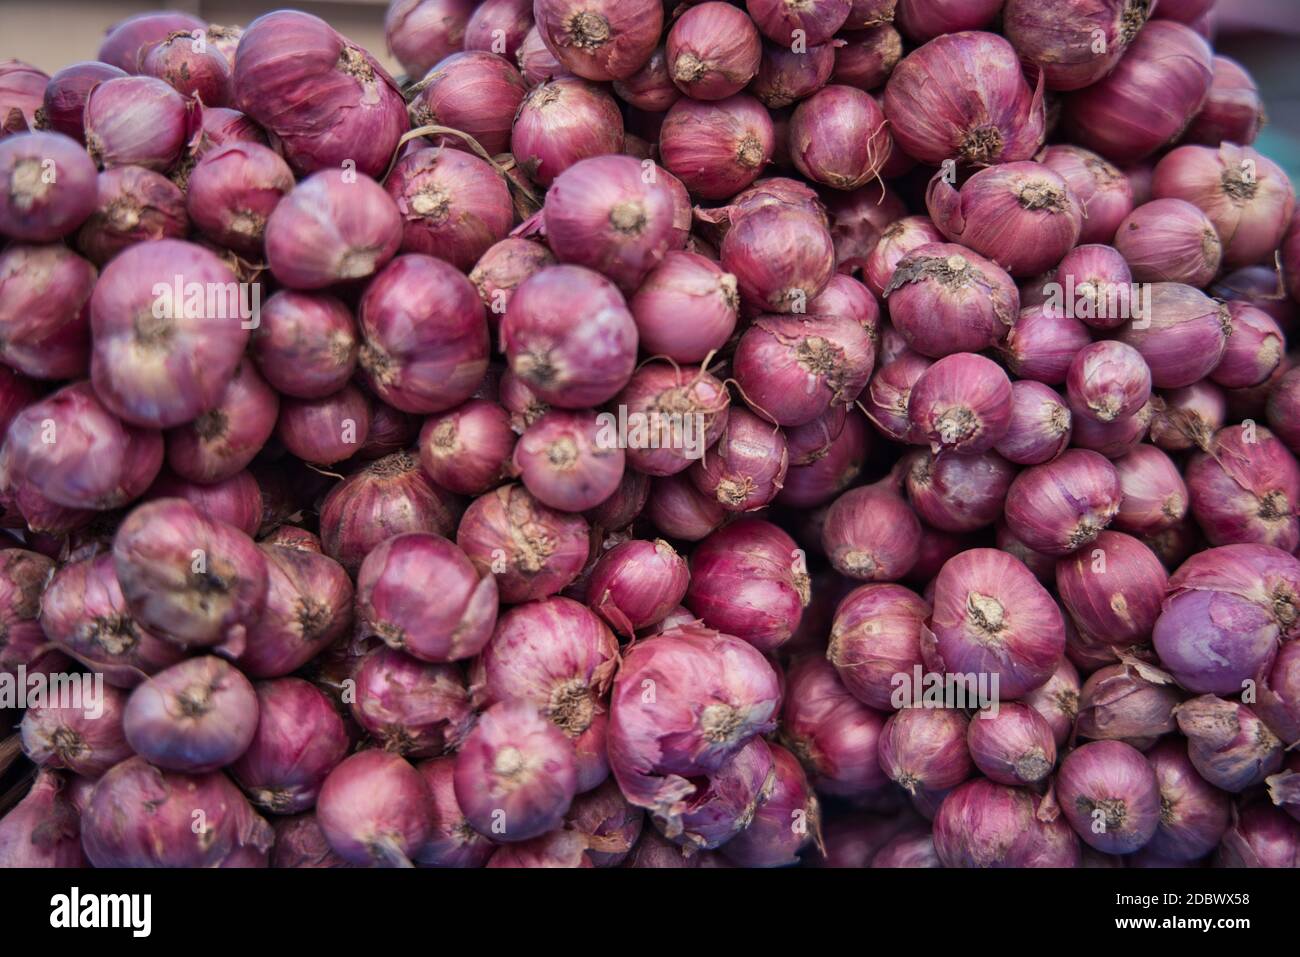 A pile of onions at a market in Hua Hin Thailand stacked and ready for sale. The onions are natural and fresh. Stock Photo